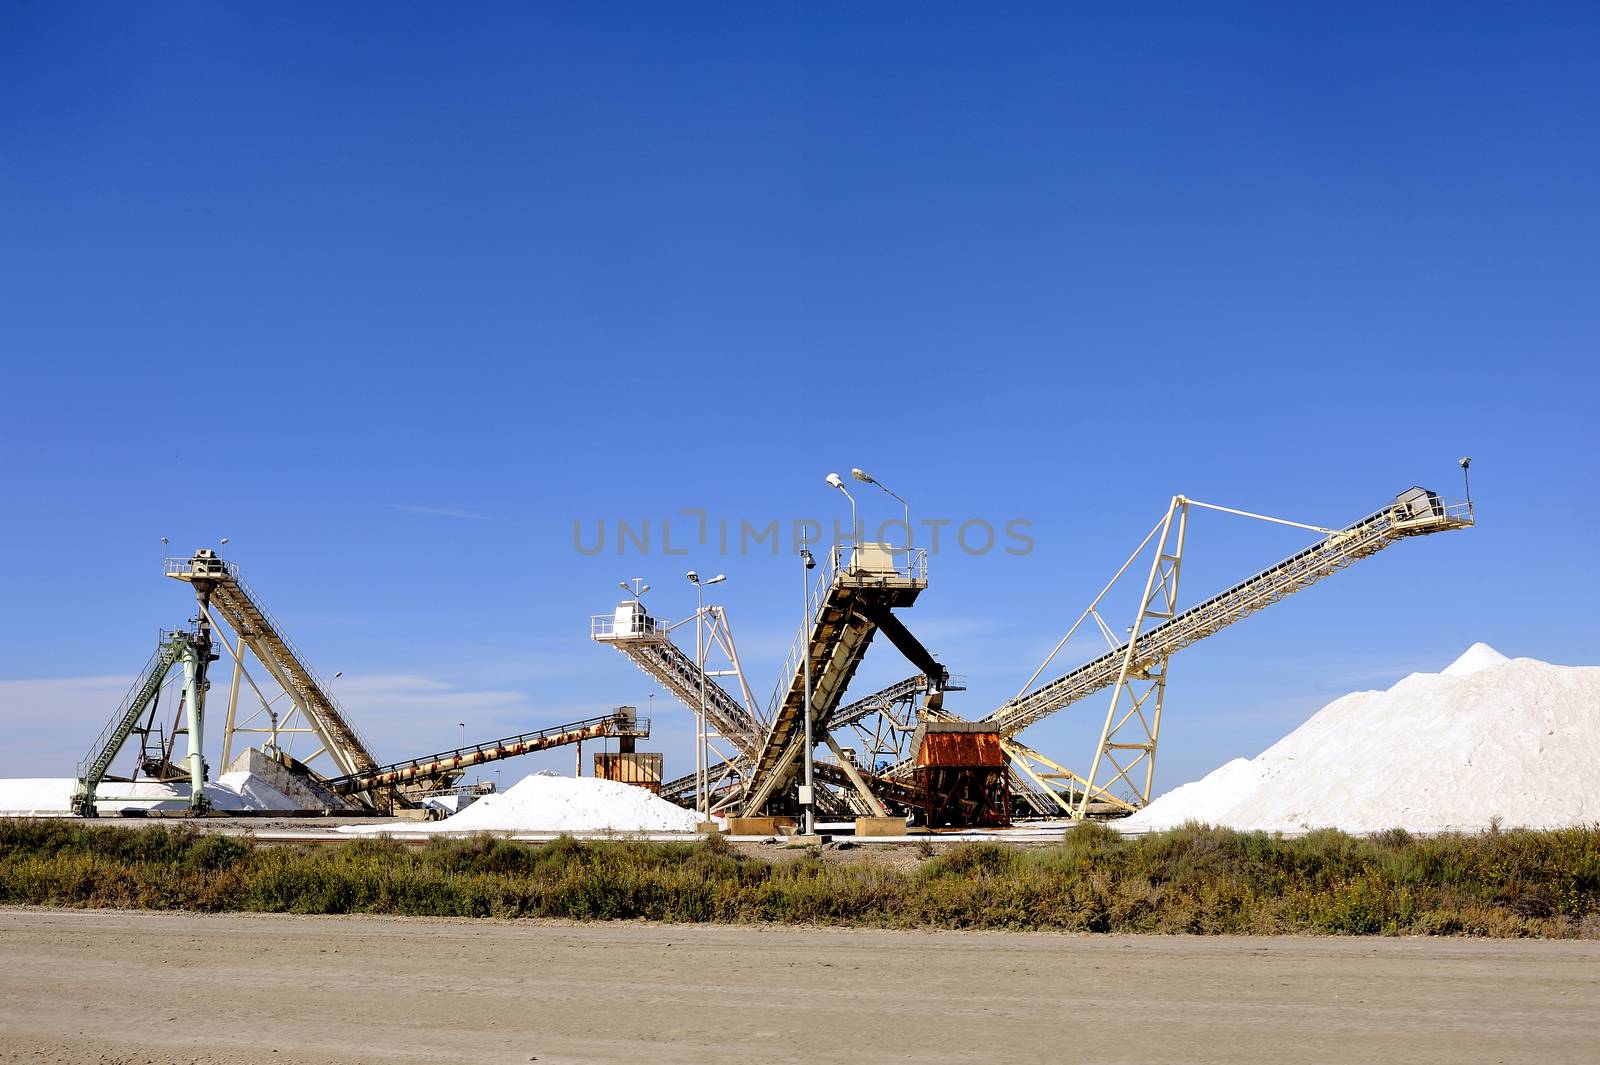 Site operating company saline Aigues-Mortes in the Camargue where stackers stack hills of sea salt.